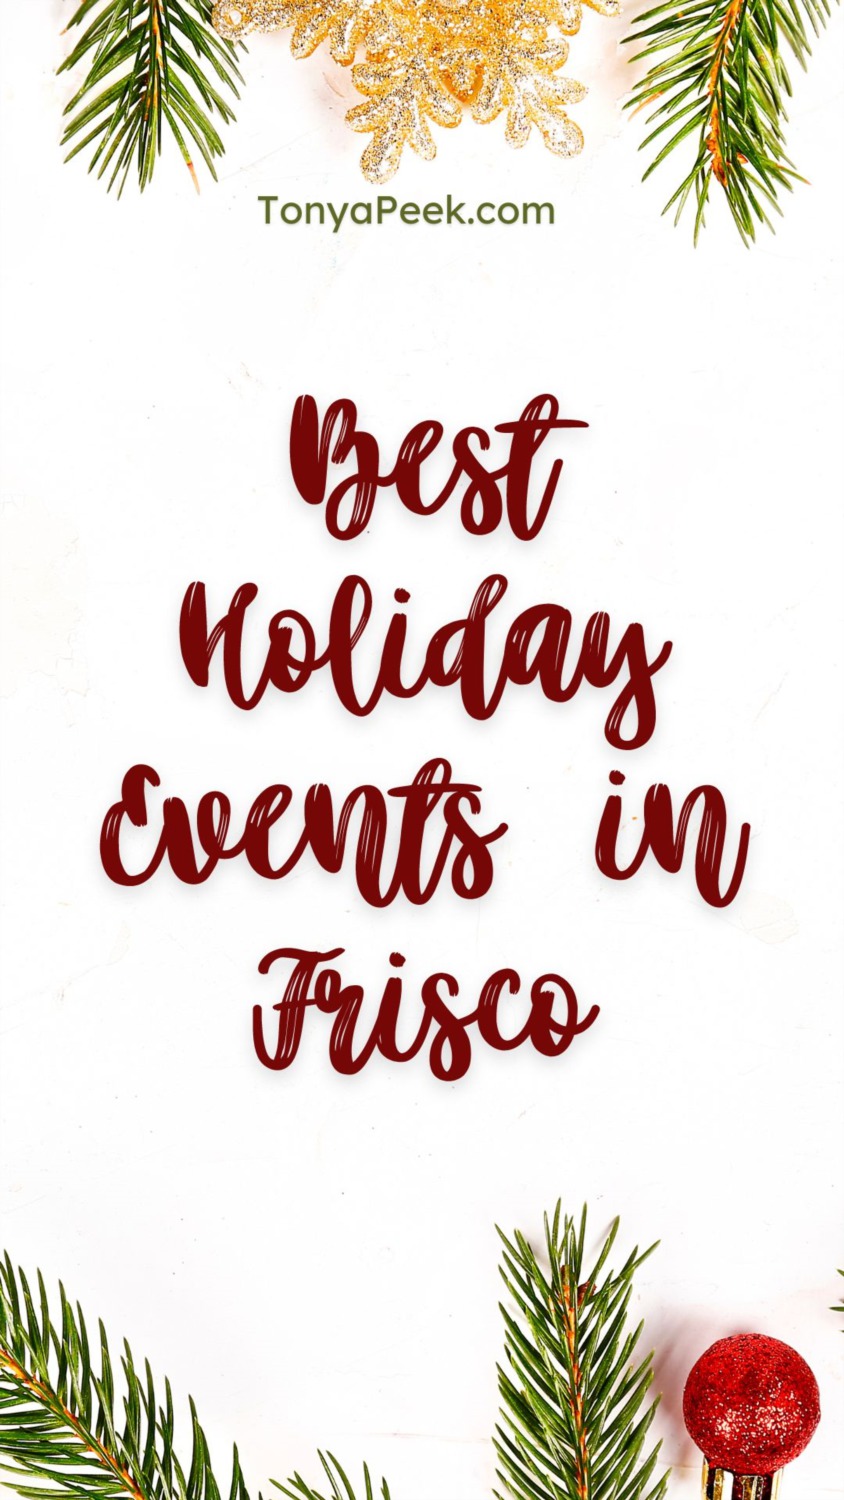 Best Holiday Events in Frisco, Texas